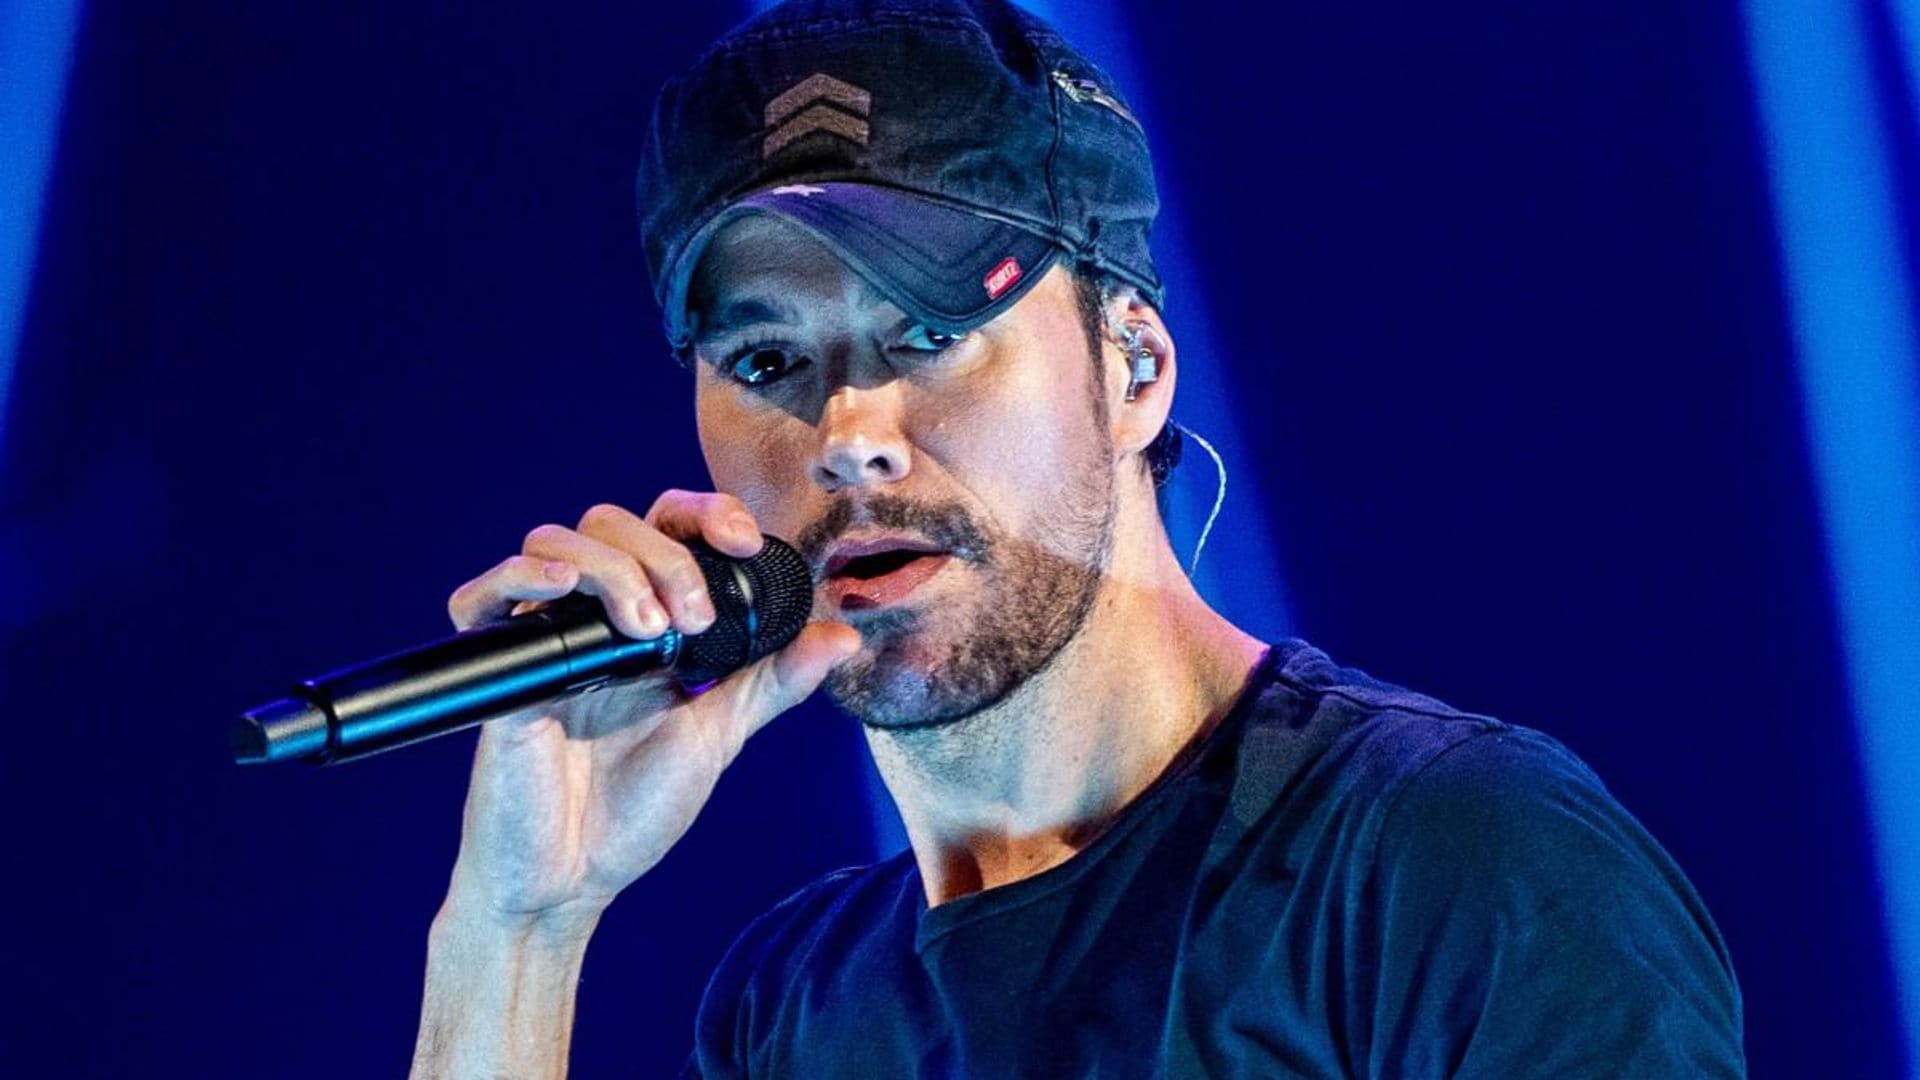 Enrique Iglesias reveals what his kids think about his music